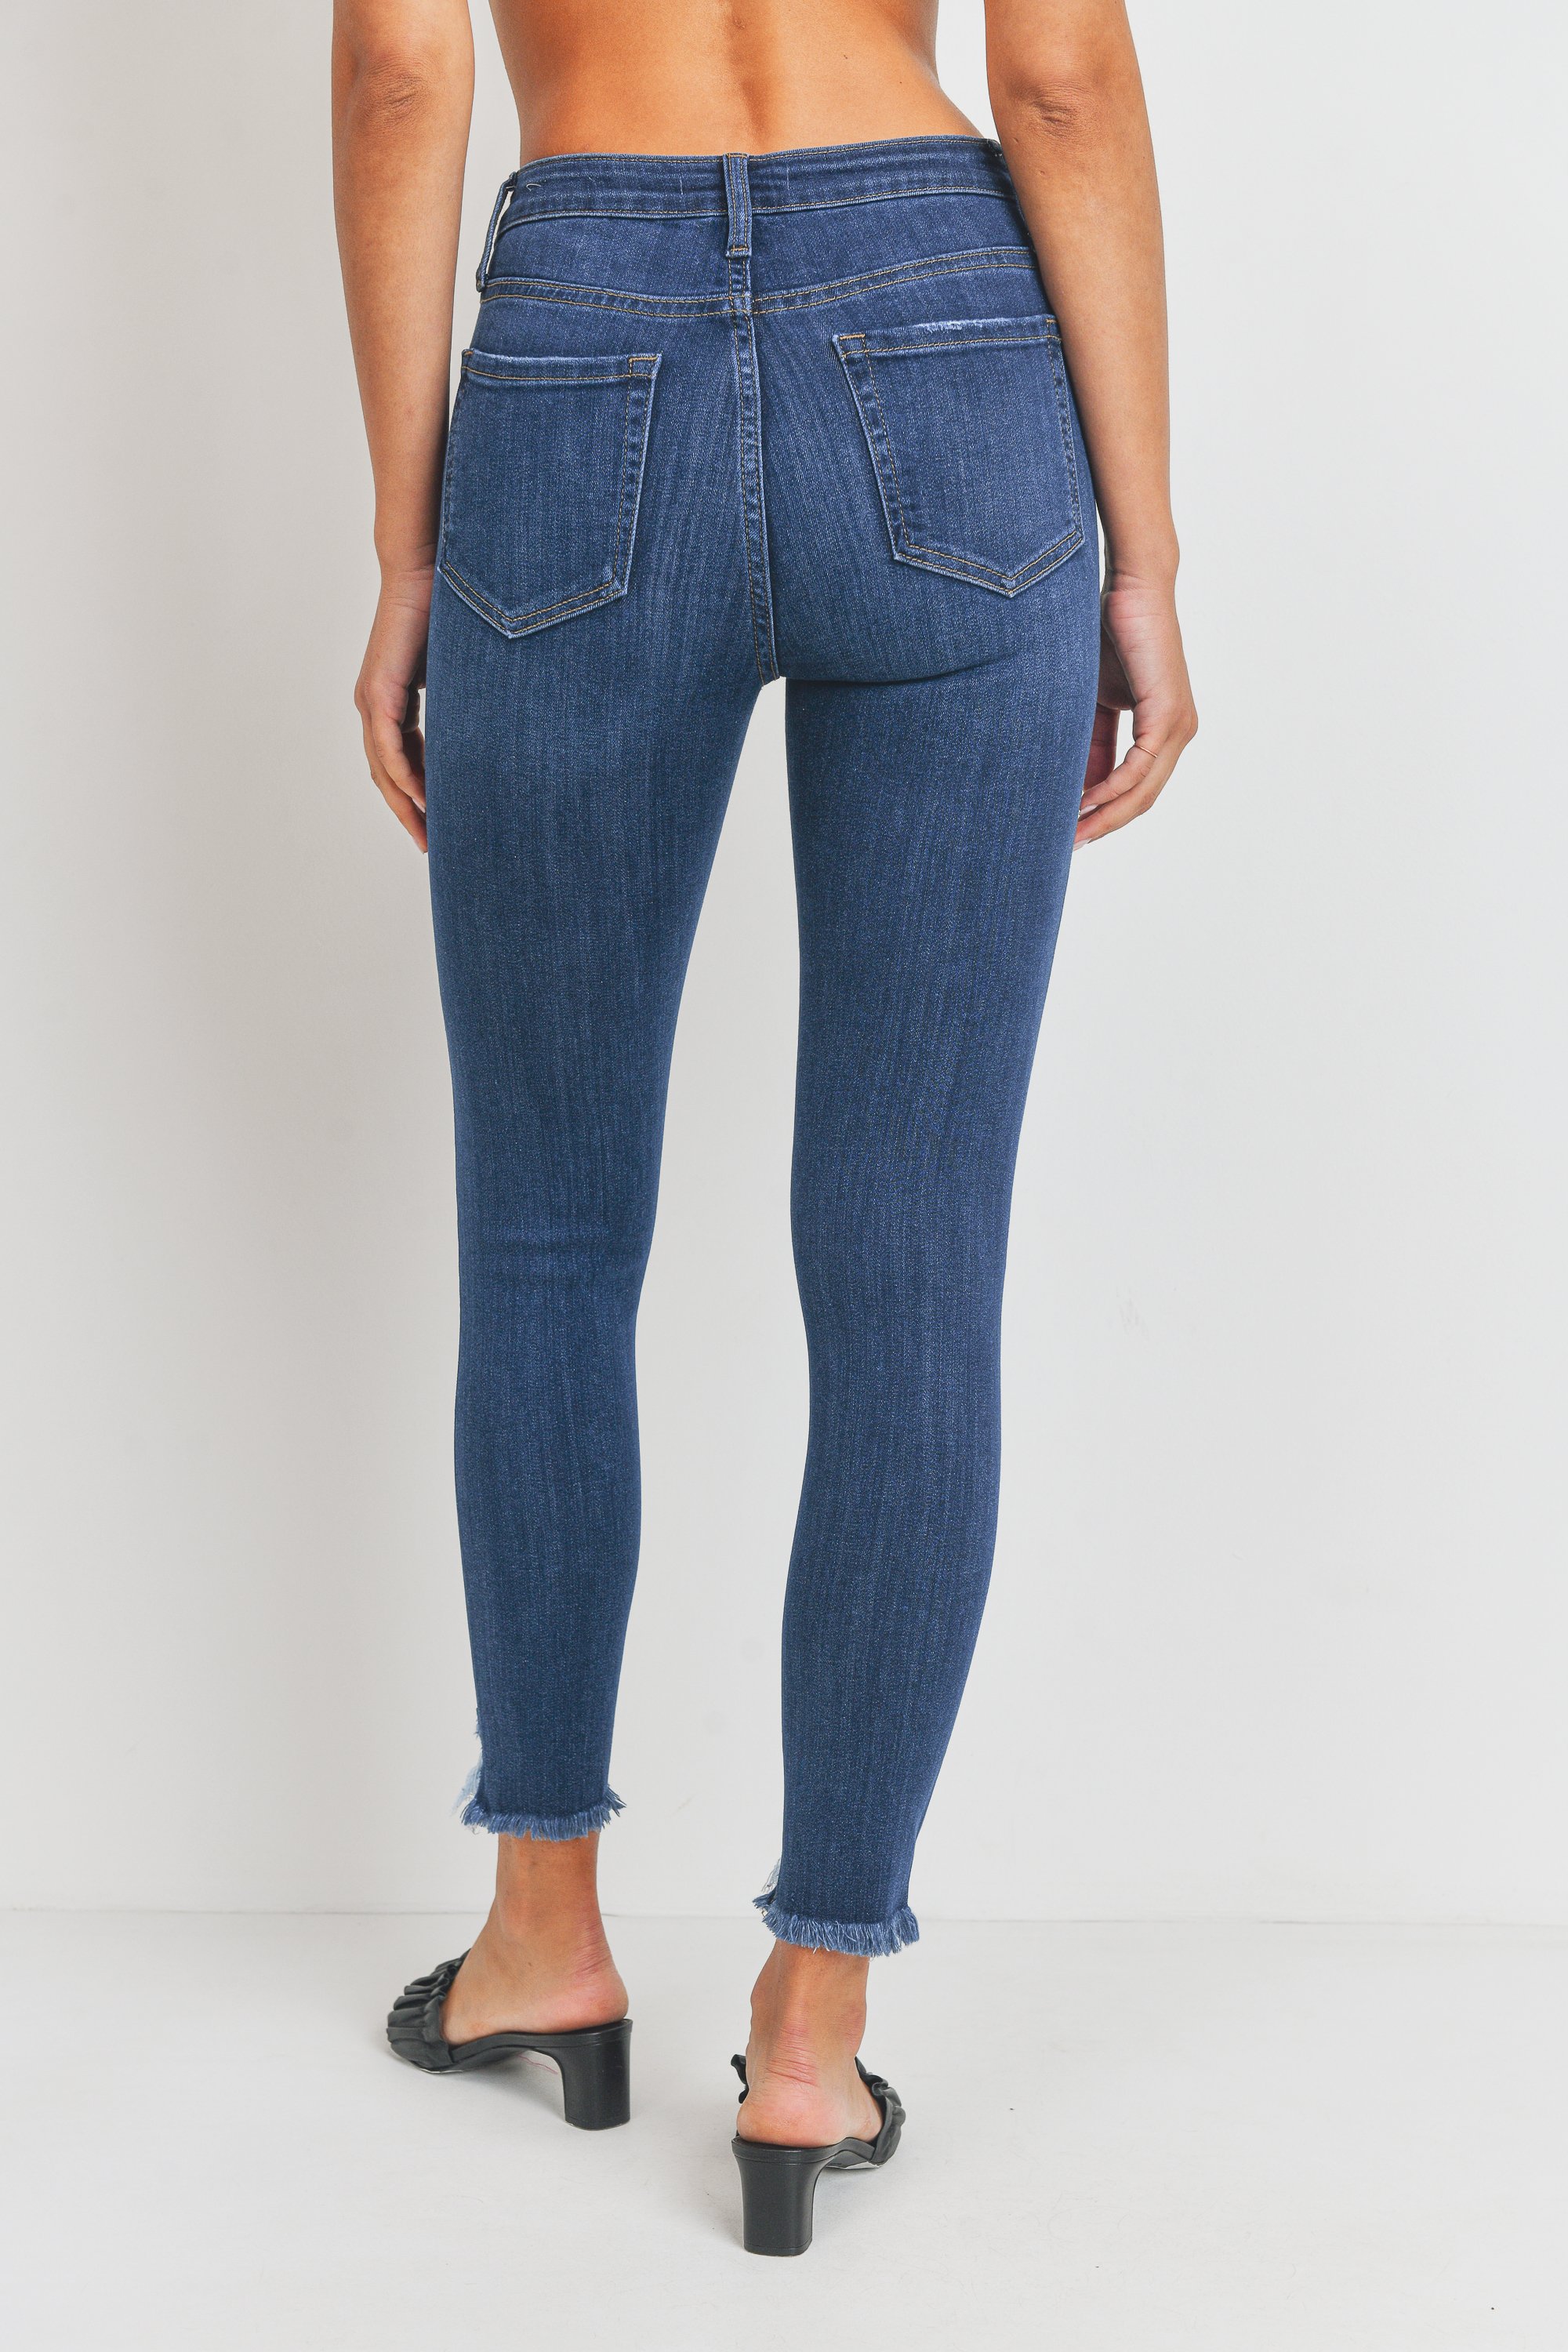 The Hawthorne Skinny — JUST USA JEANS